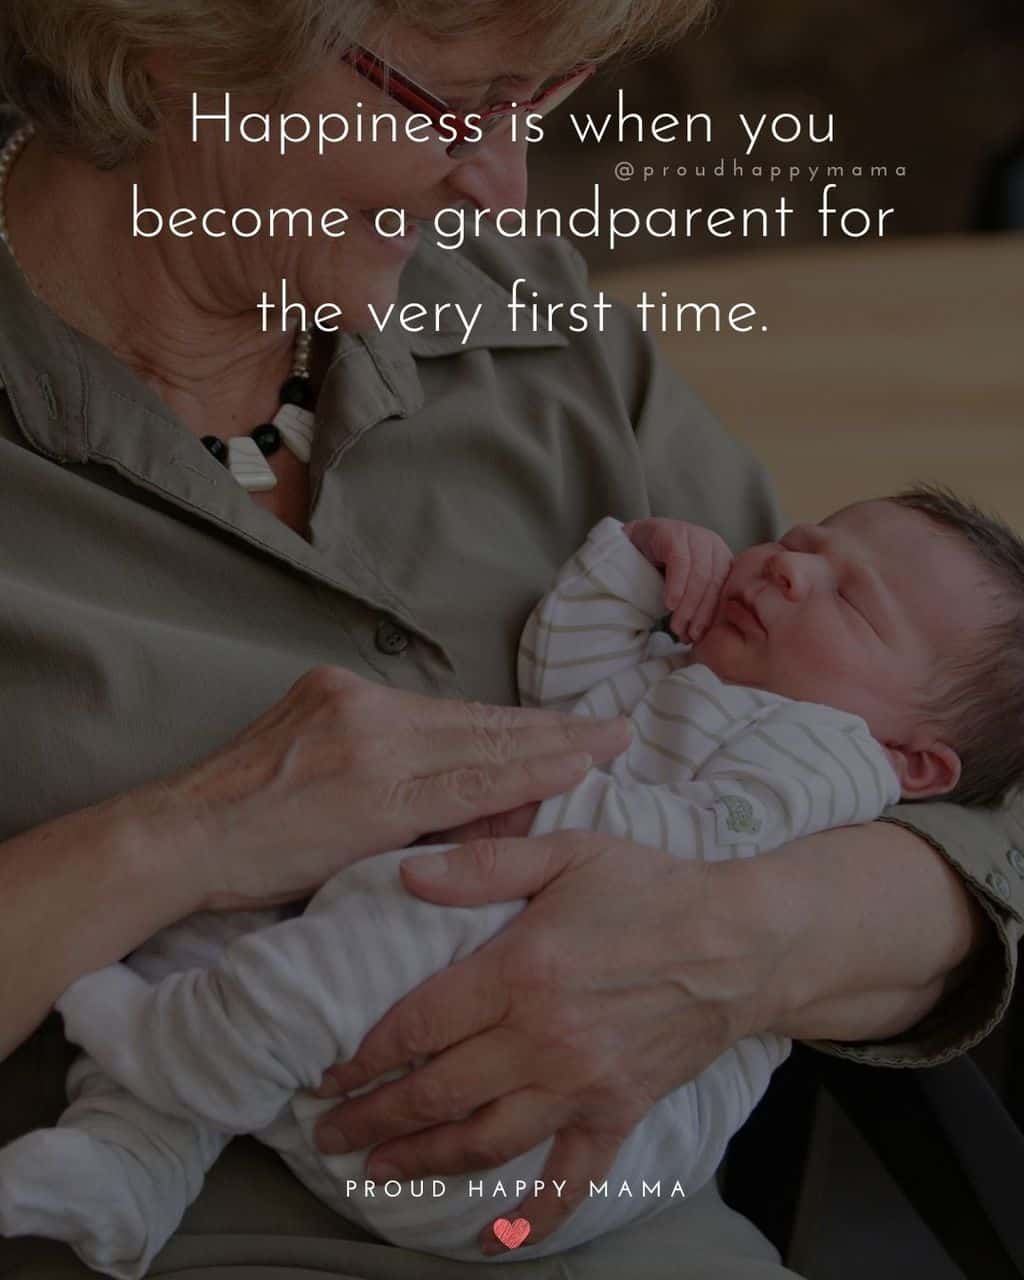 Grandparent Quotes – Happiness is when you become a grandparent for the very first time.’